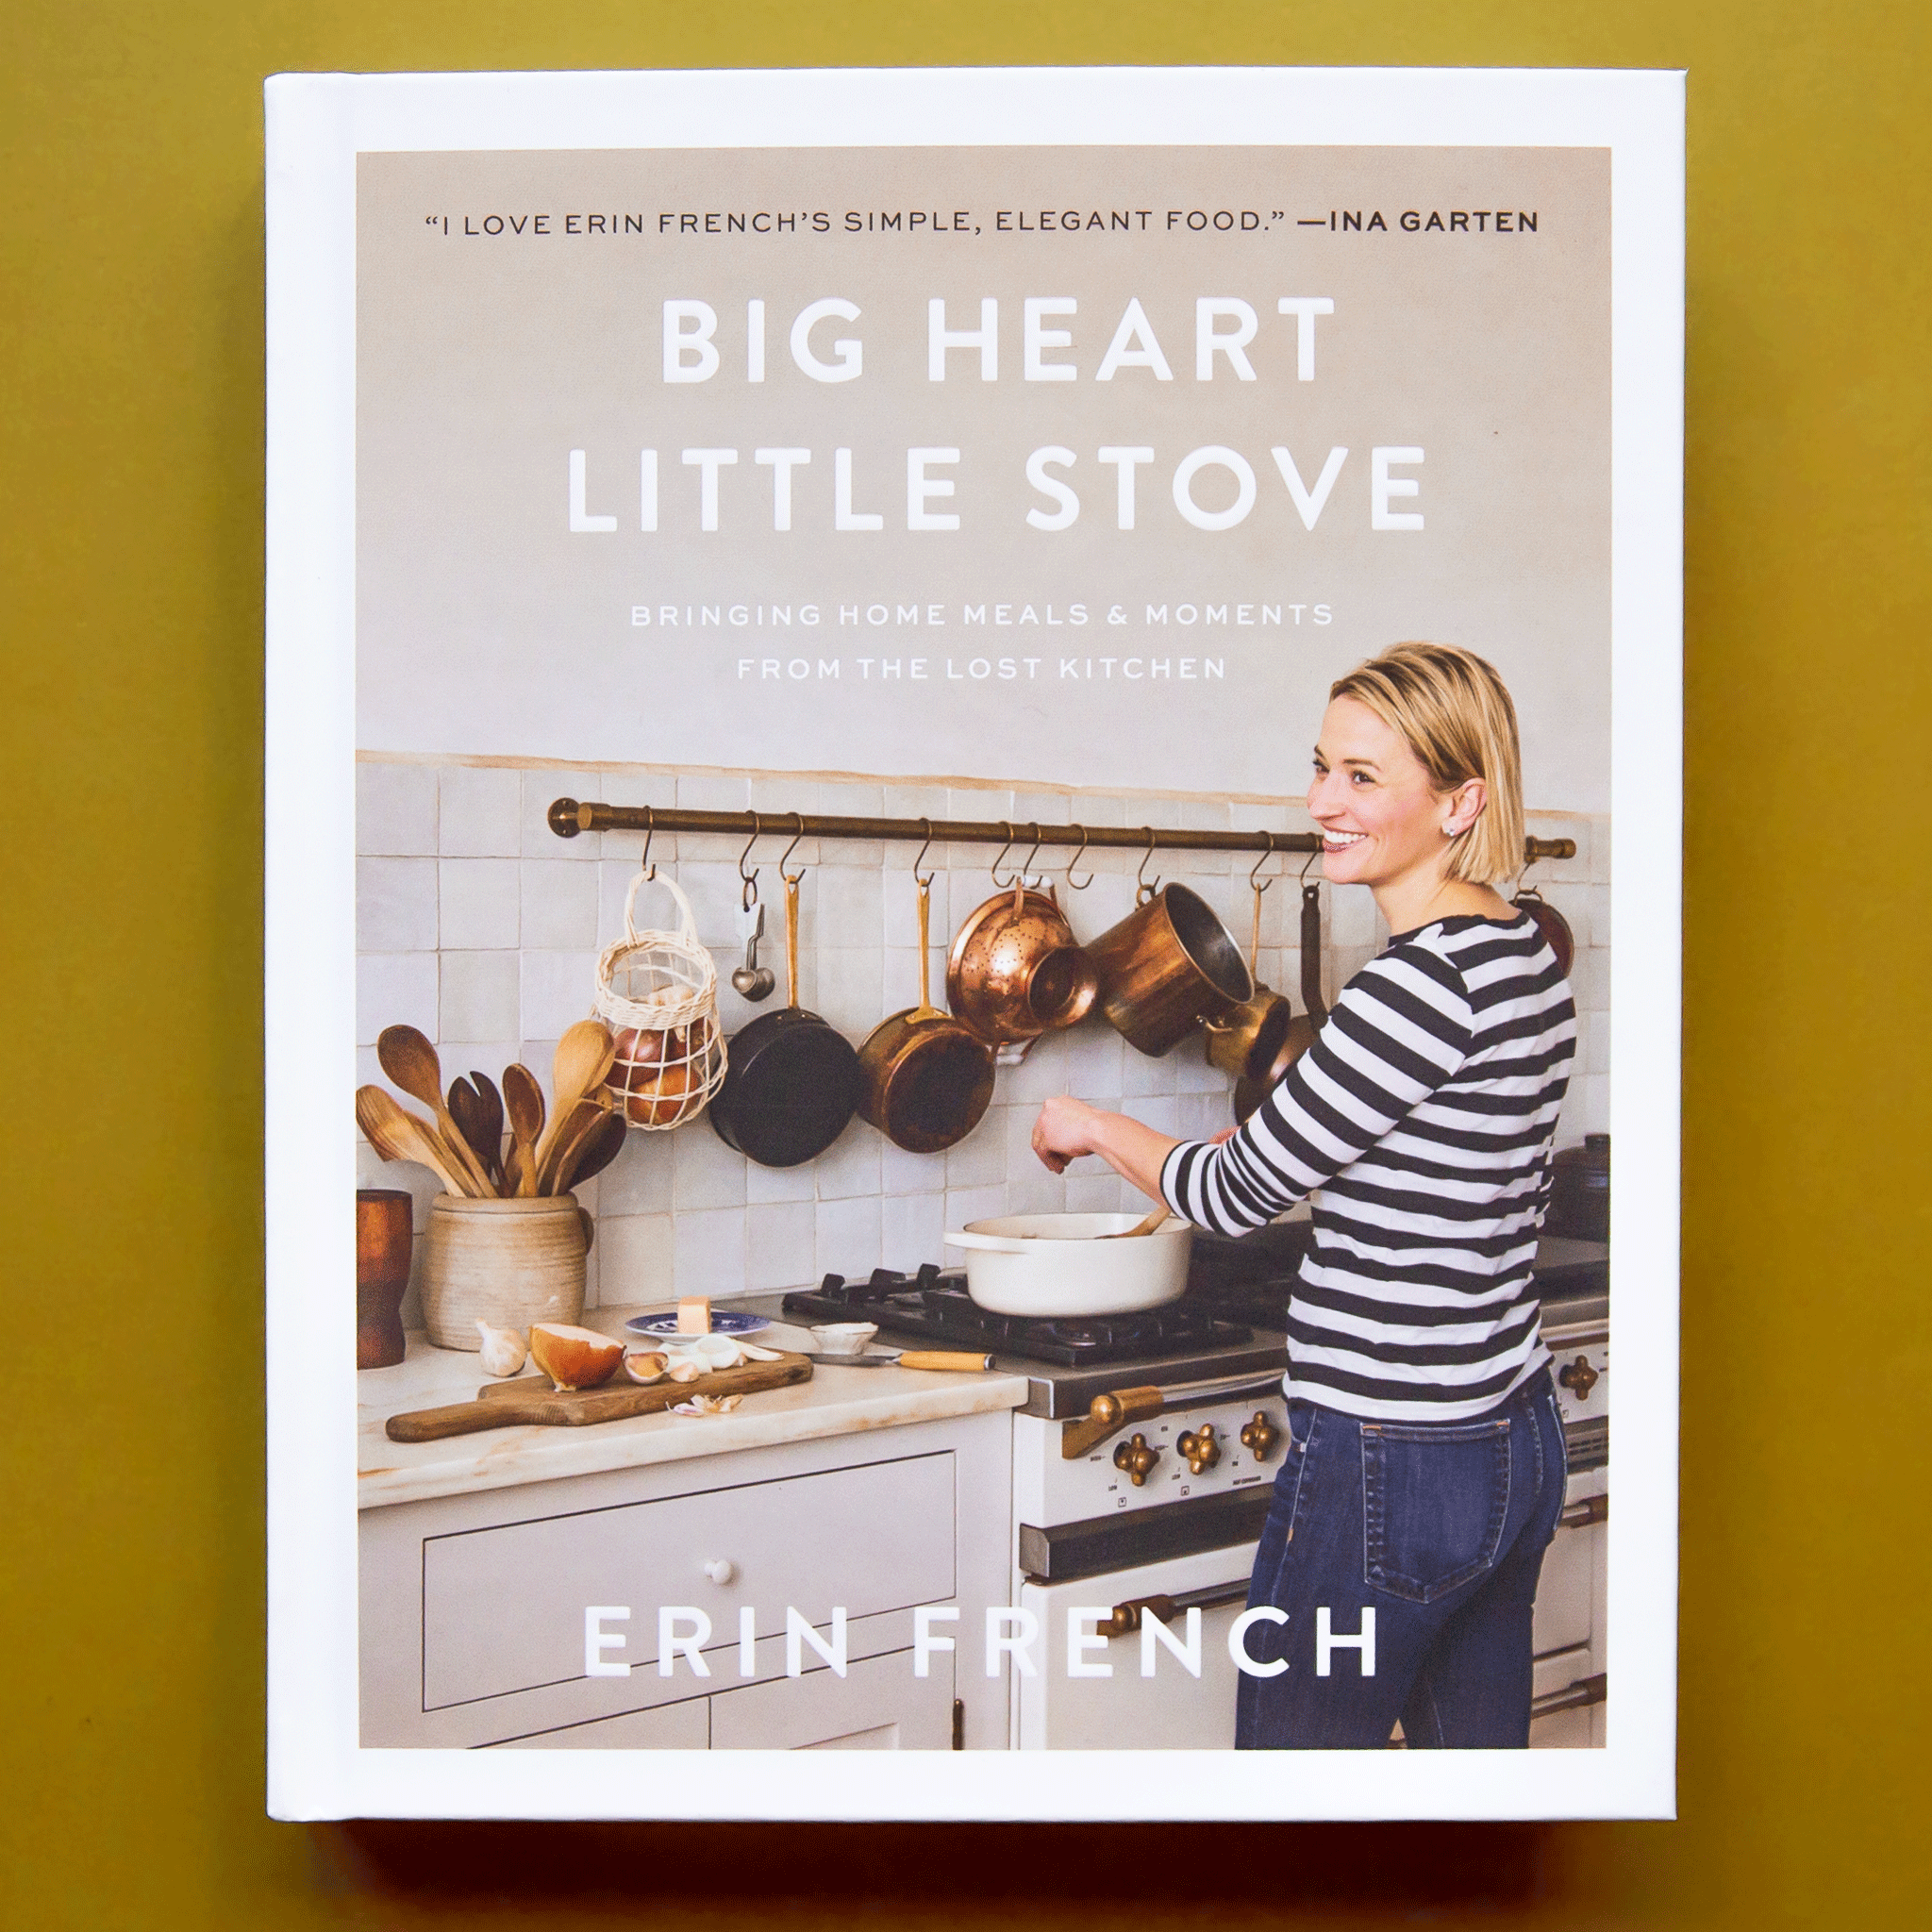 On a chartreuse background is a neutral colored bookcover with a photo of a woman cooking in front of the stove with the title toward the top that reads, "Big Heart Little Stove Bringing Home Meals & Moments From The Lost Kitchen". 